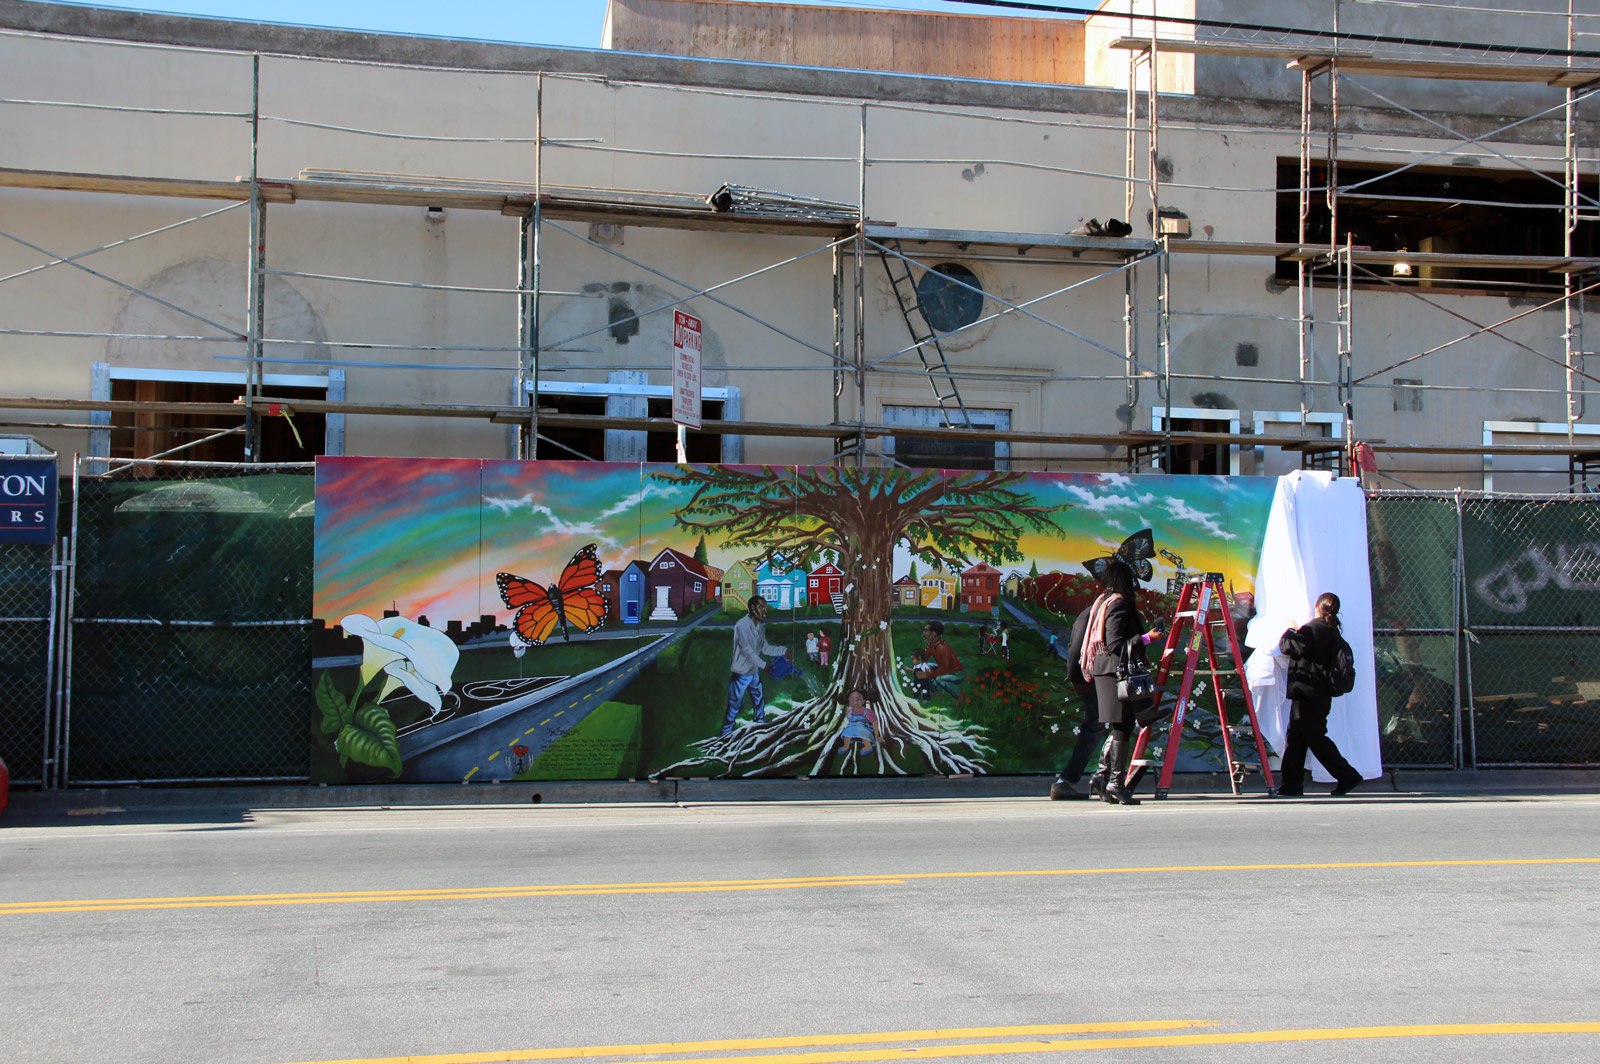 In West Oakland, the "Tree of Life" traveling mural project urges